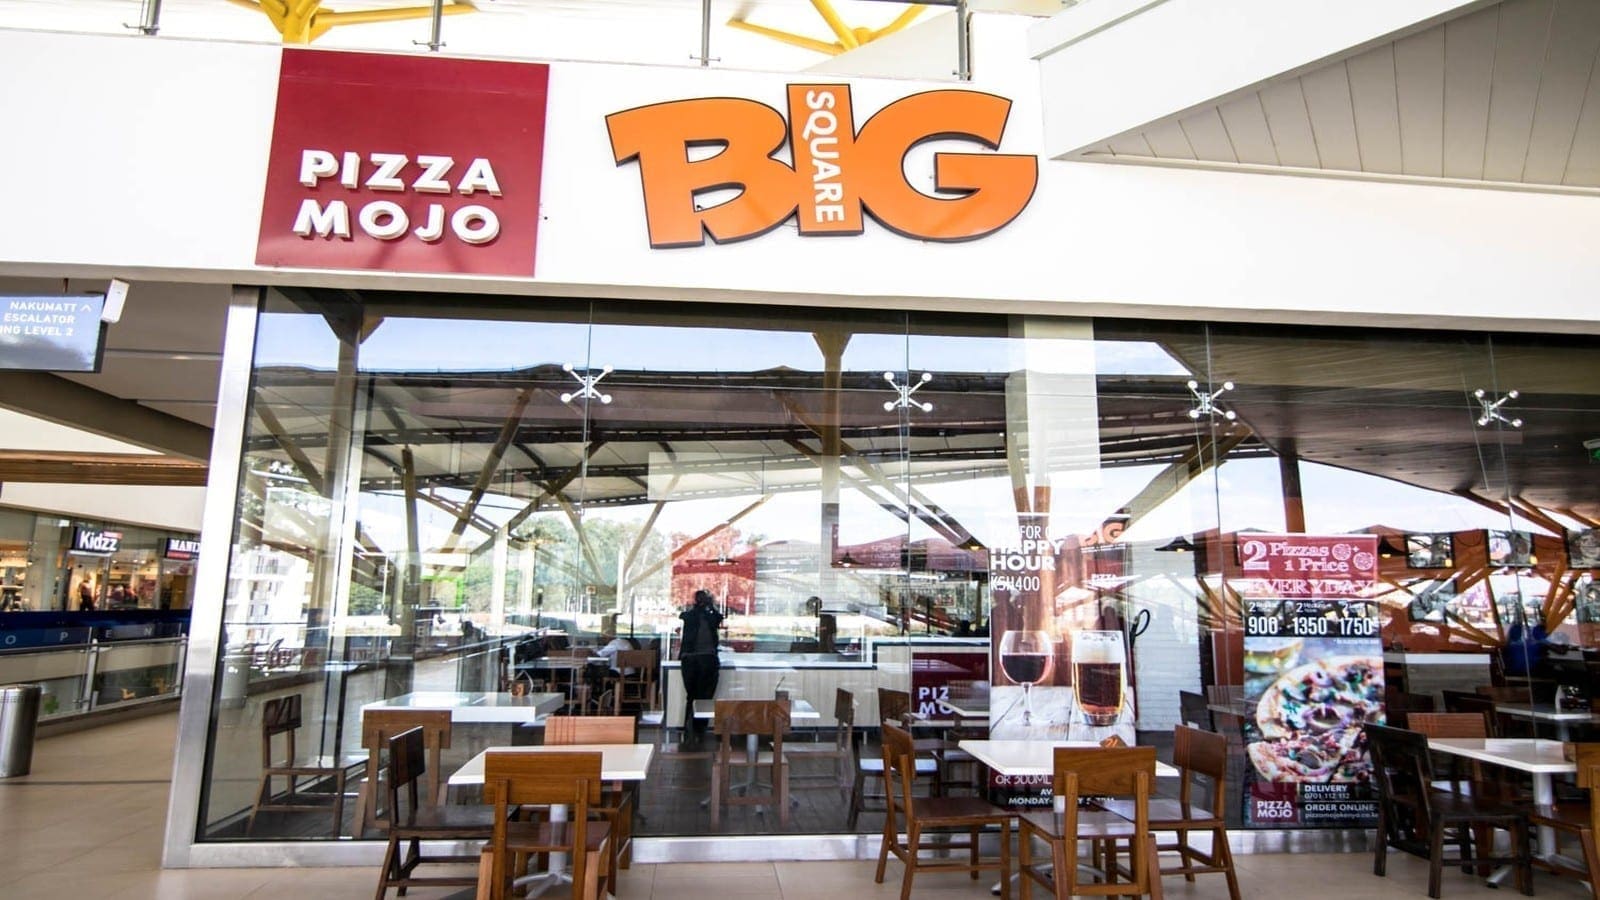 Kenyan fast-food restaurant Big Square opens new outlet as part of its 2022 target of 30 outlets